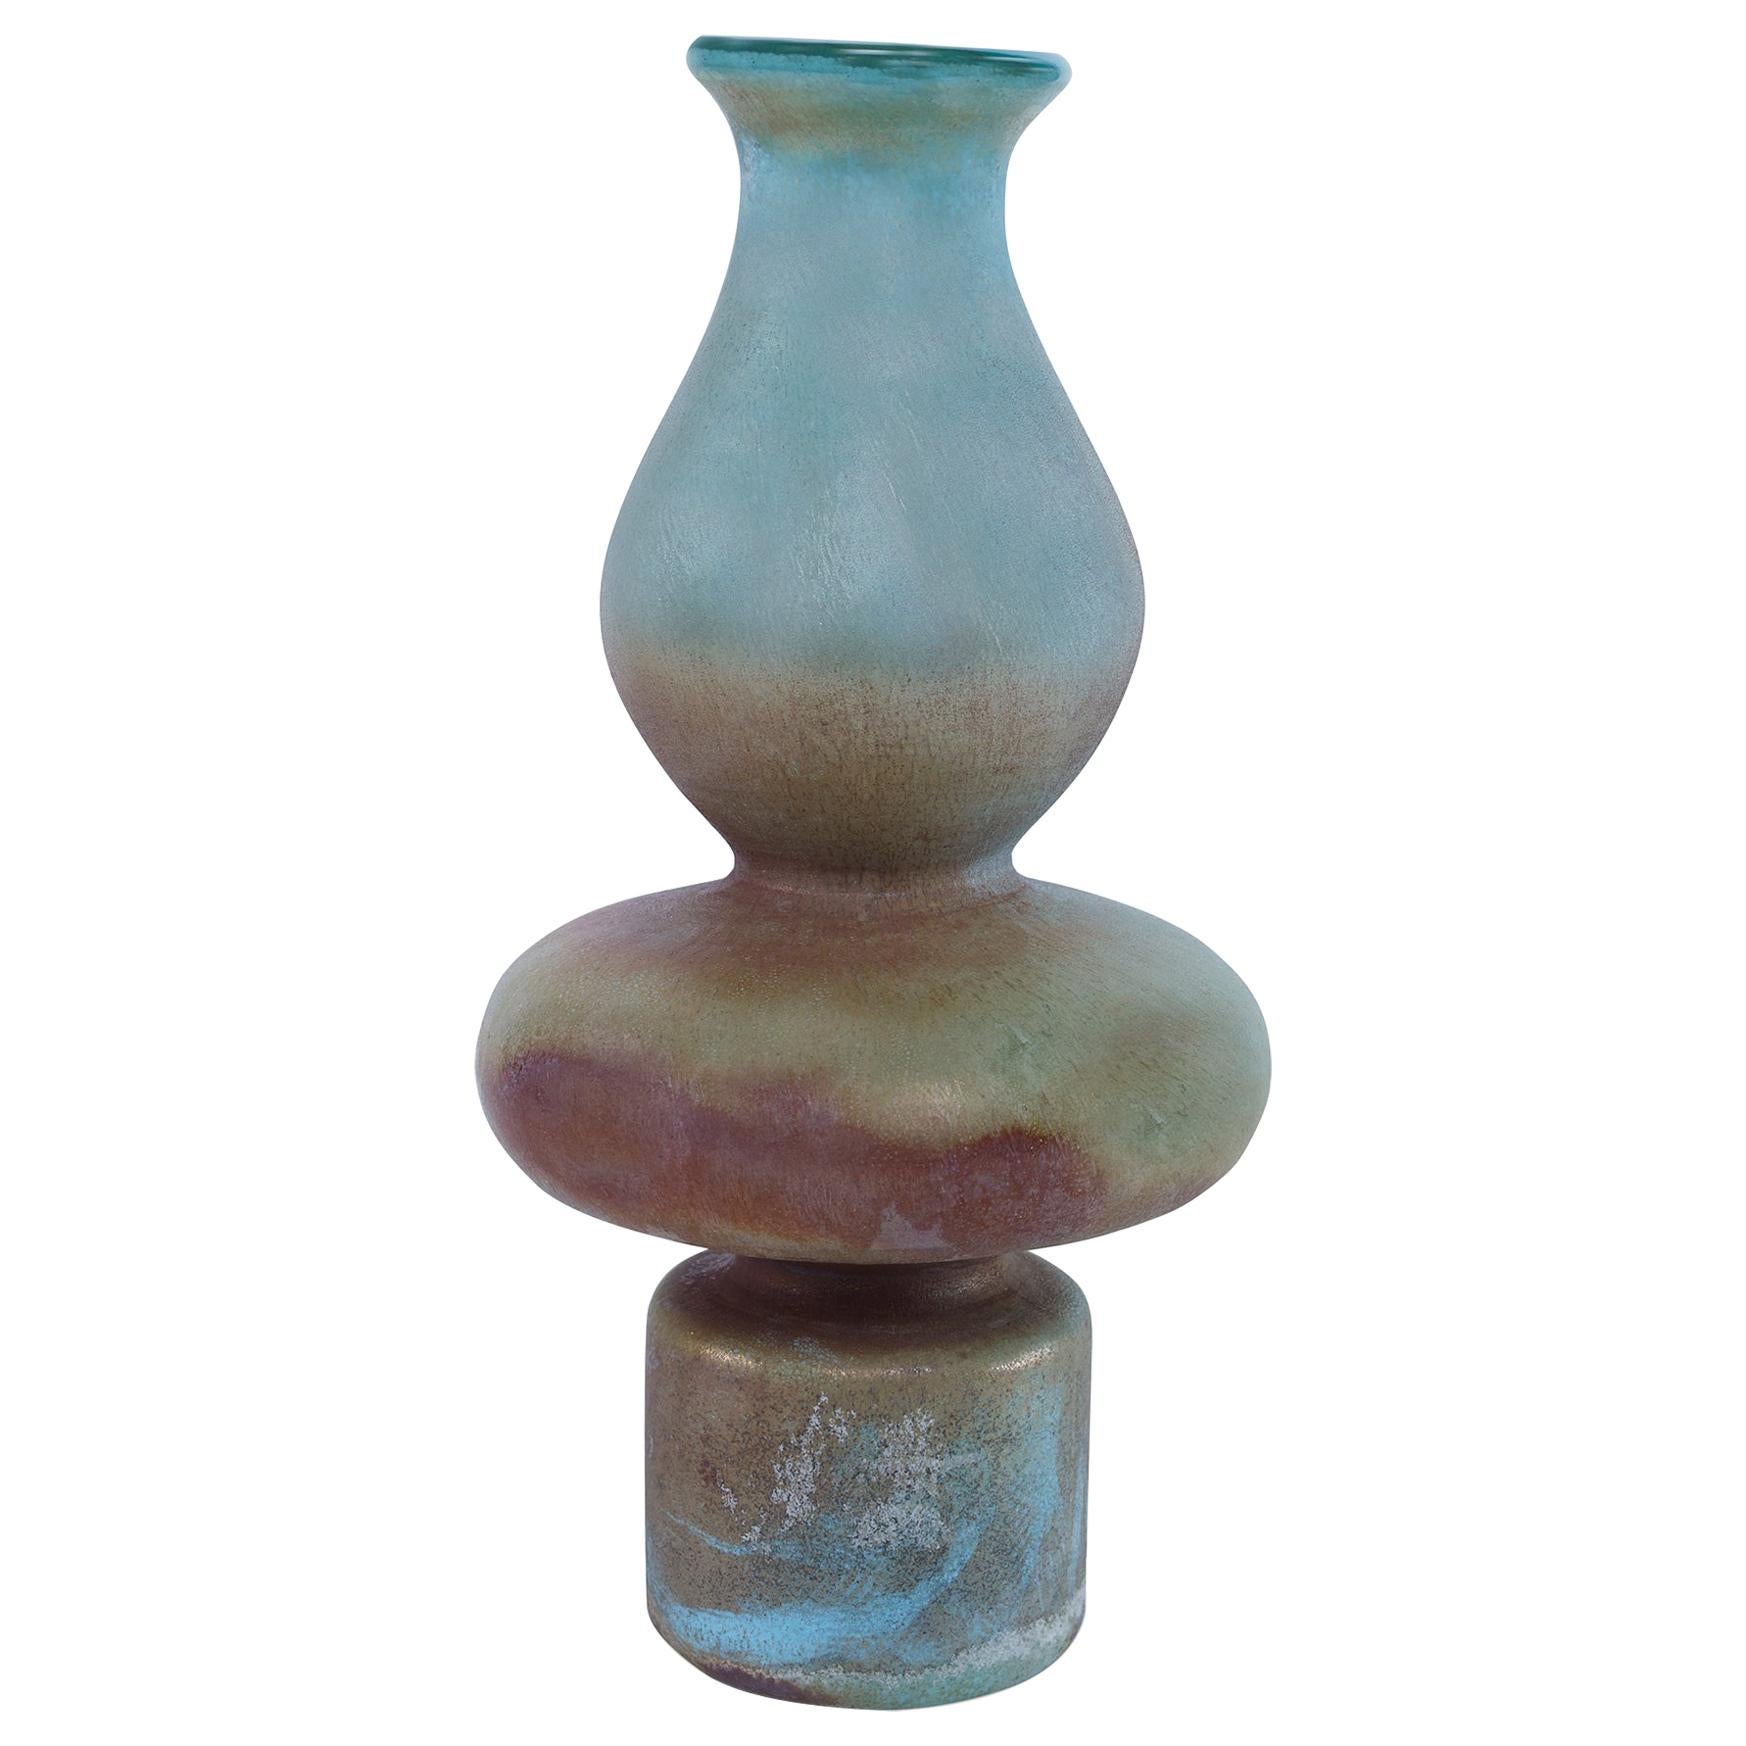 Evora Handmade Large Vase in Large in Iridescent Glass by CuratedKravet